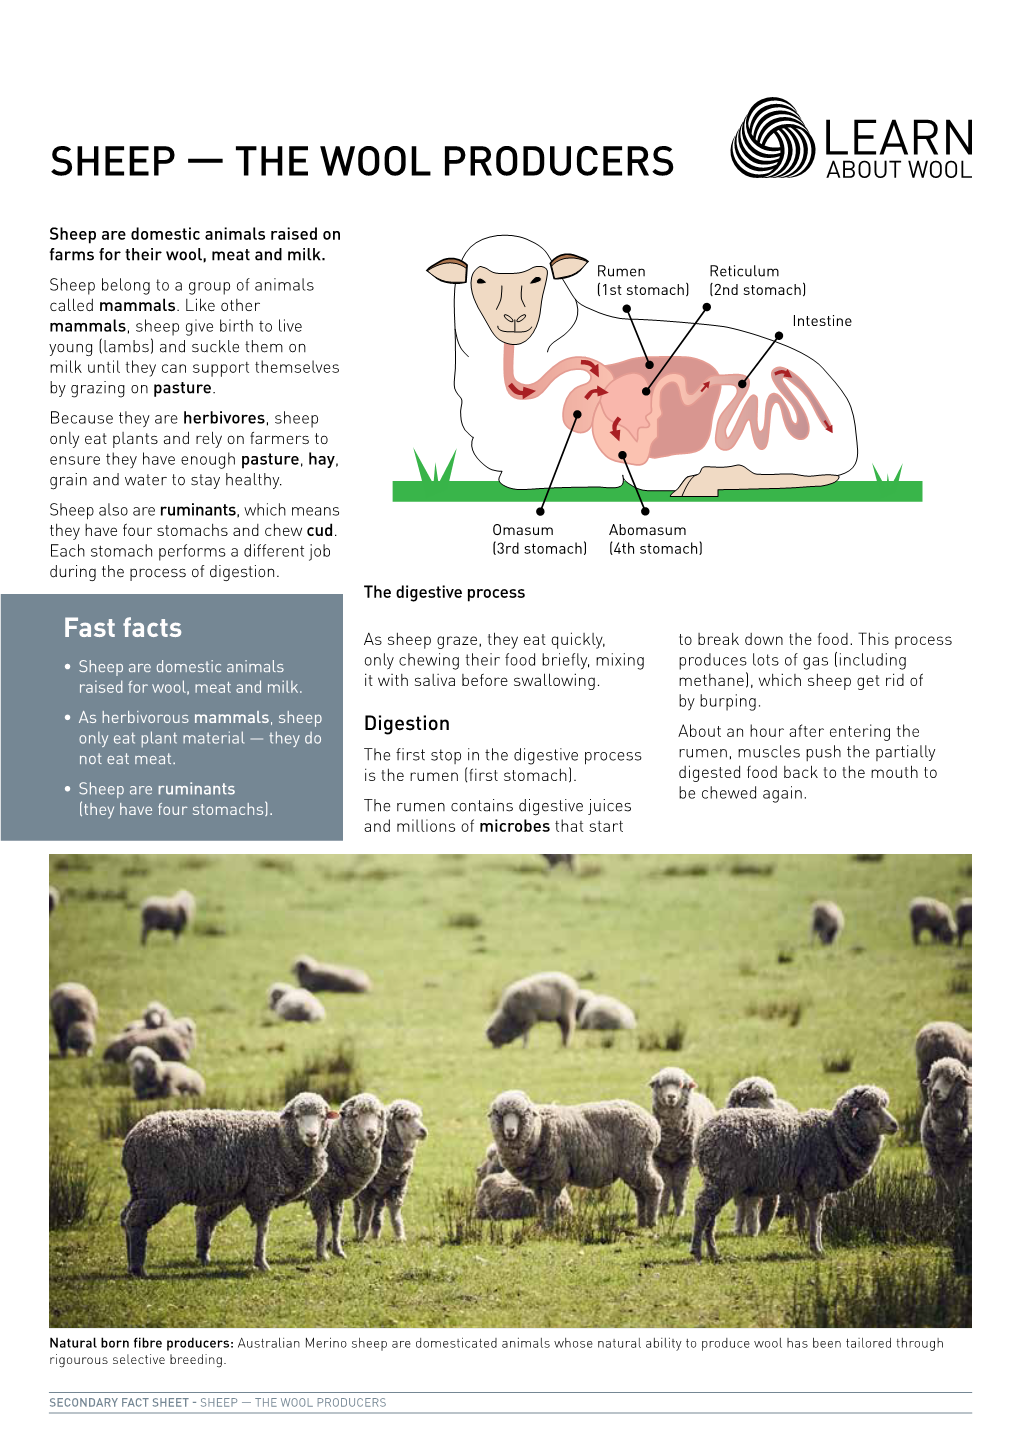 Sheep — the Wool Producers